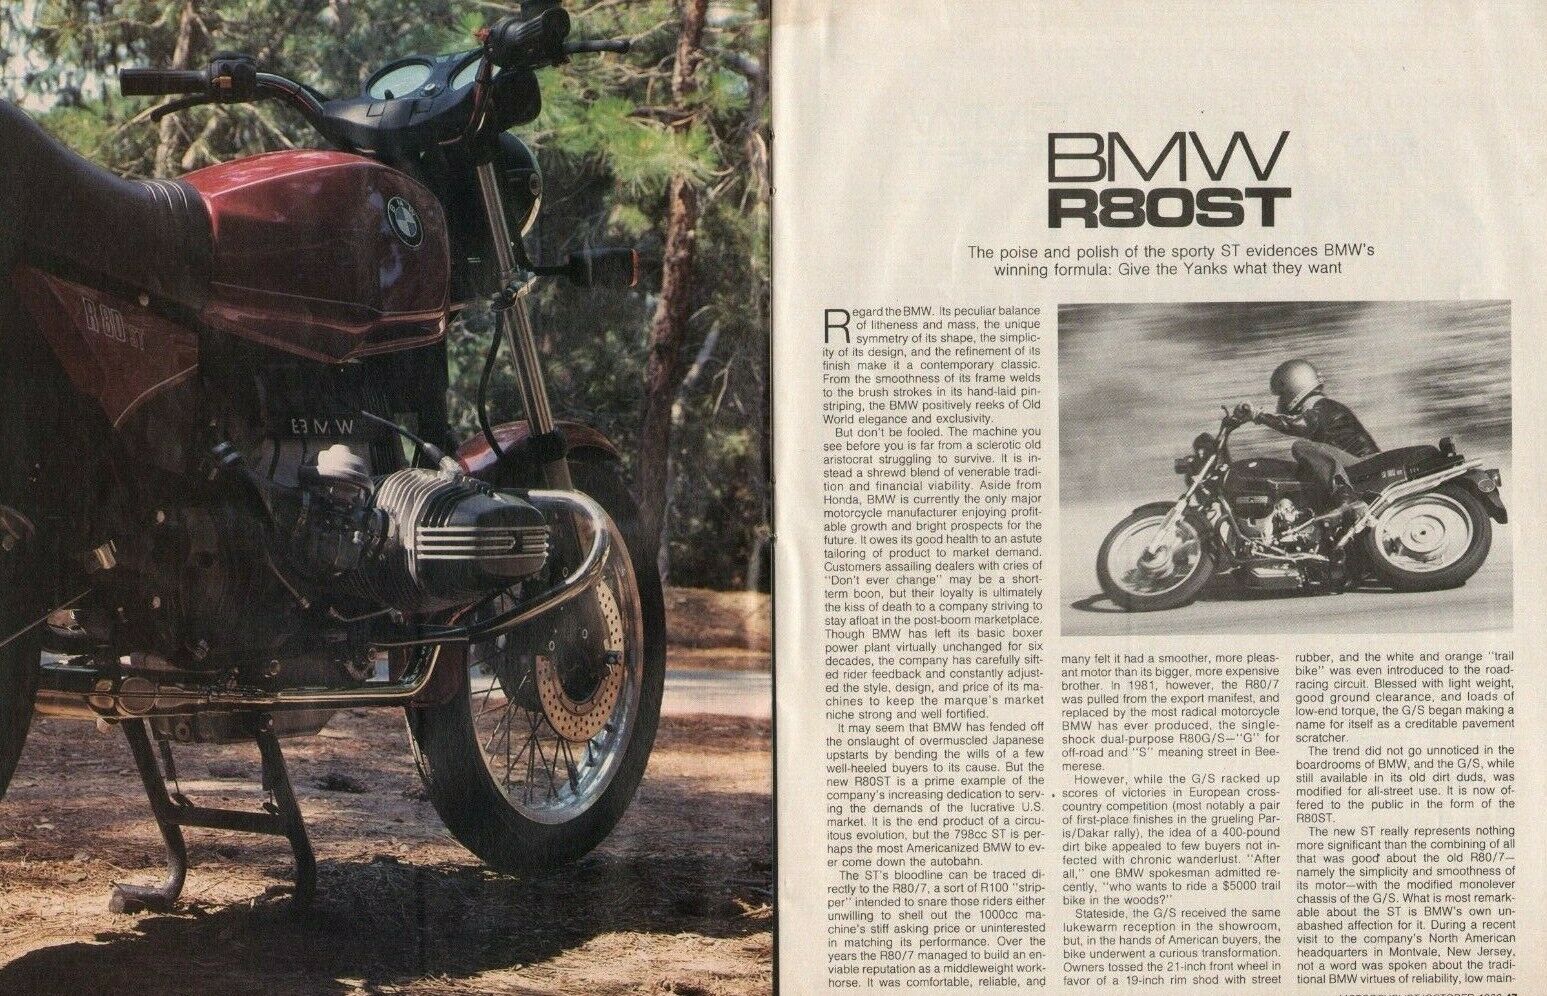 1983 Bmw R80st - 5-page Vintage Motorcycle Road Test Article